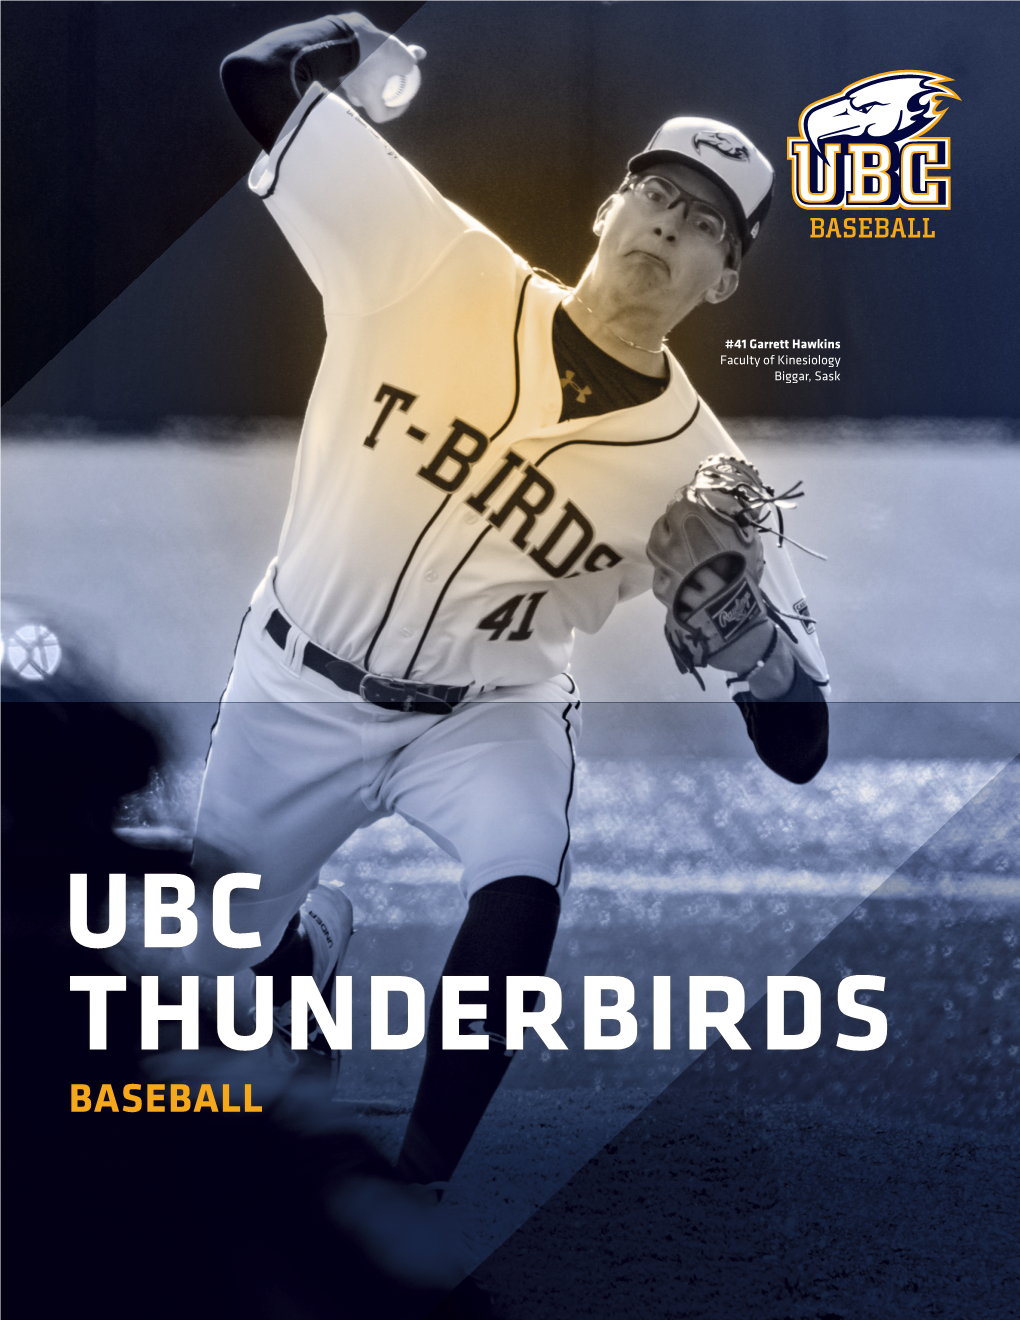 UBC THUNDERBIRDS BASEBALL WELCOME to UBC We Are a Globally Recognized University in a World Class City, Complete with a High Performance Athletics Program